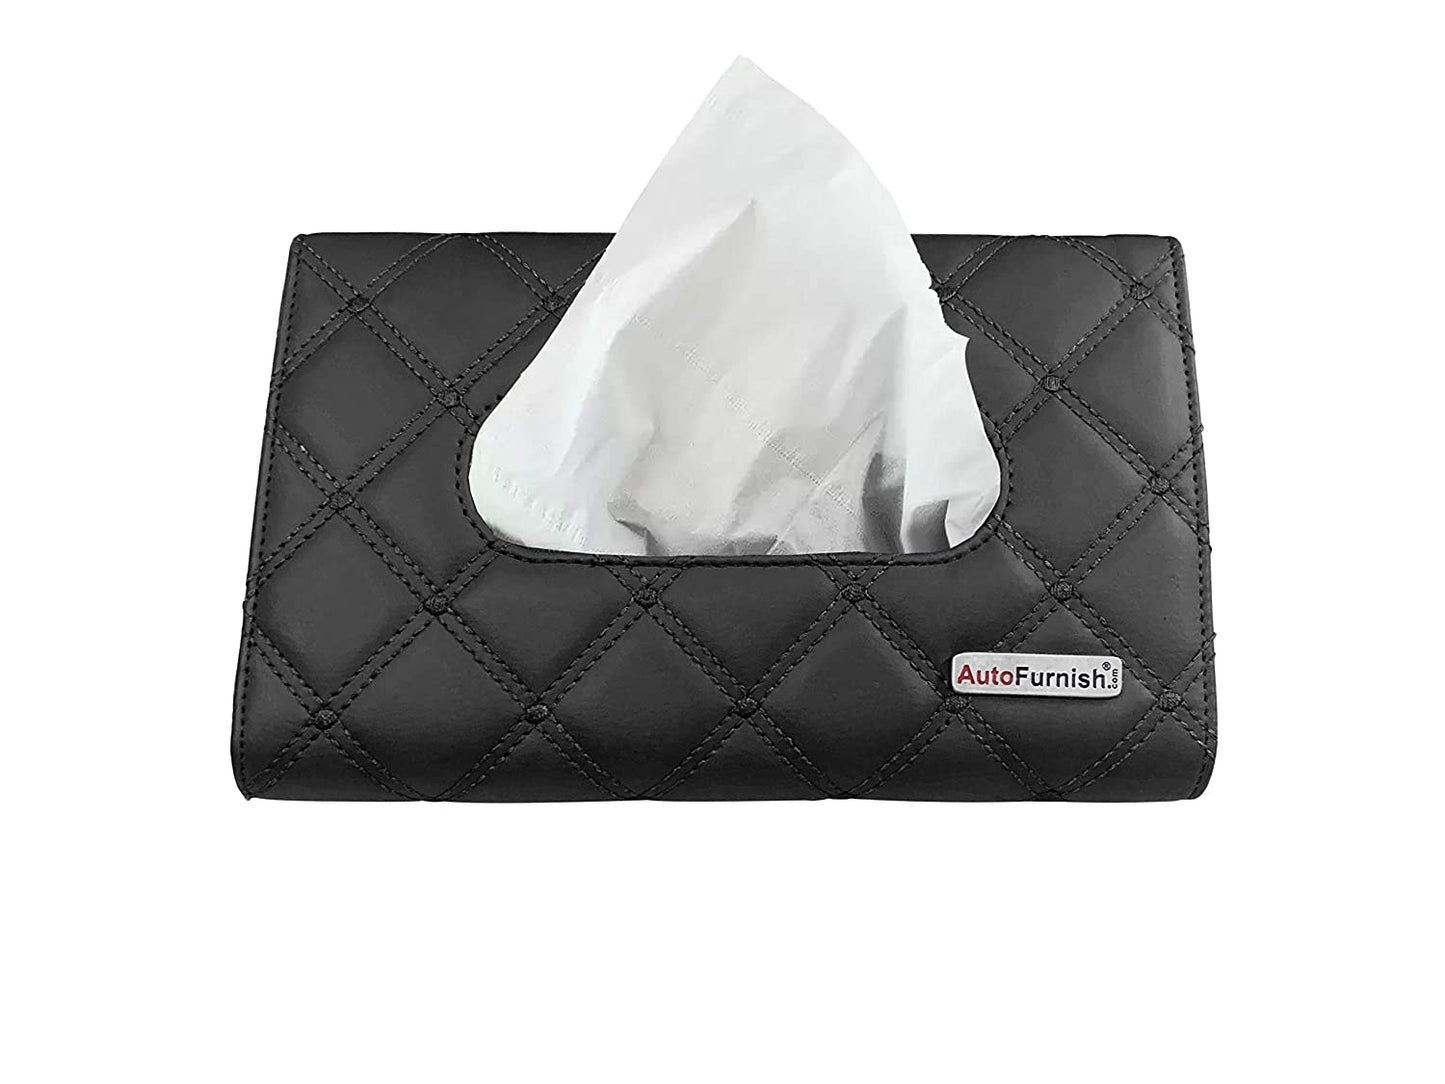 7D PREMIUM Sun Visor Tissue Box Holder | Water Resistant PU Leather with Straps and 50 Free Tissues (Set of 2)